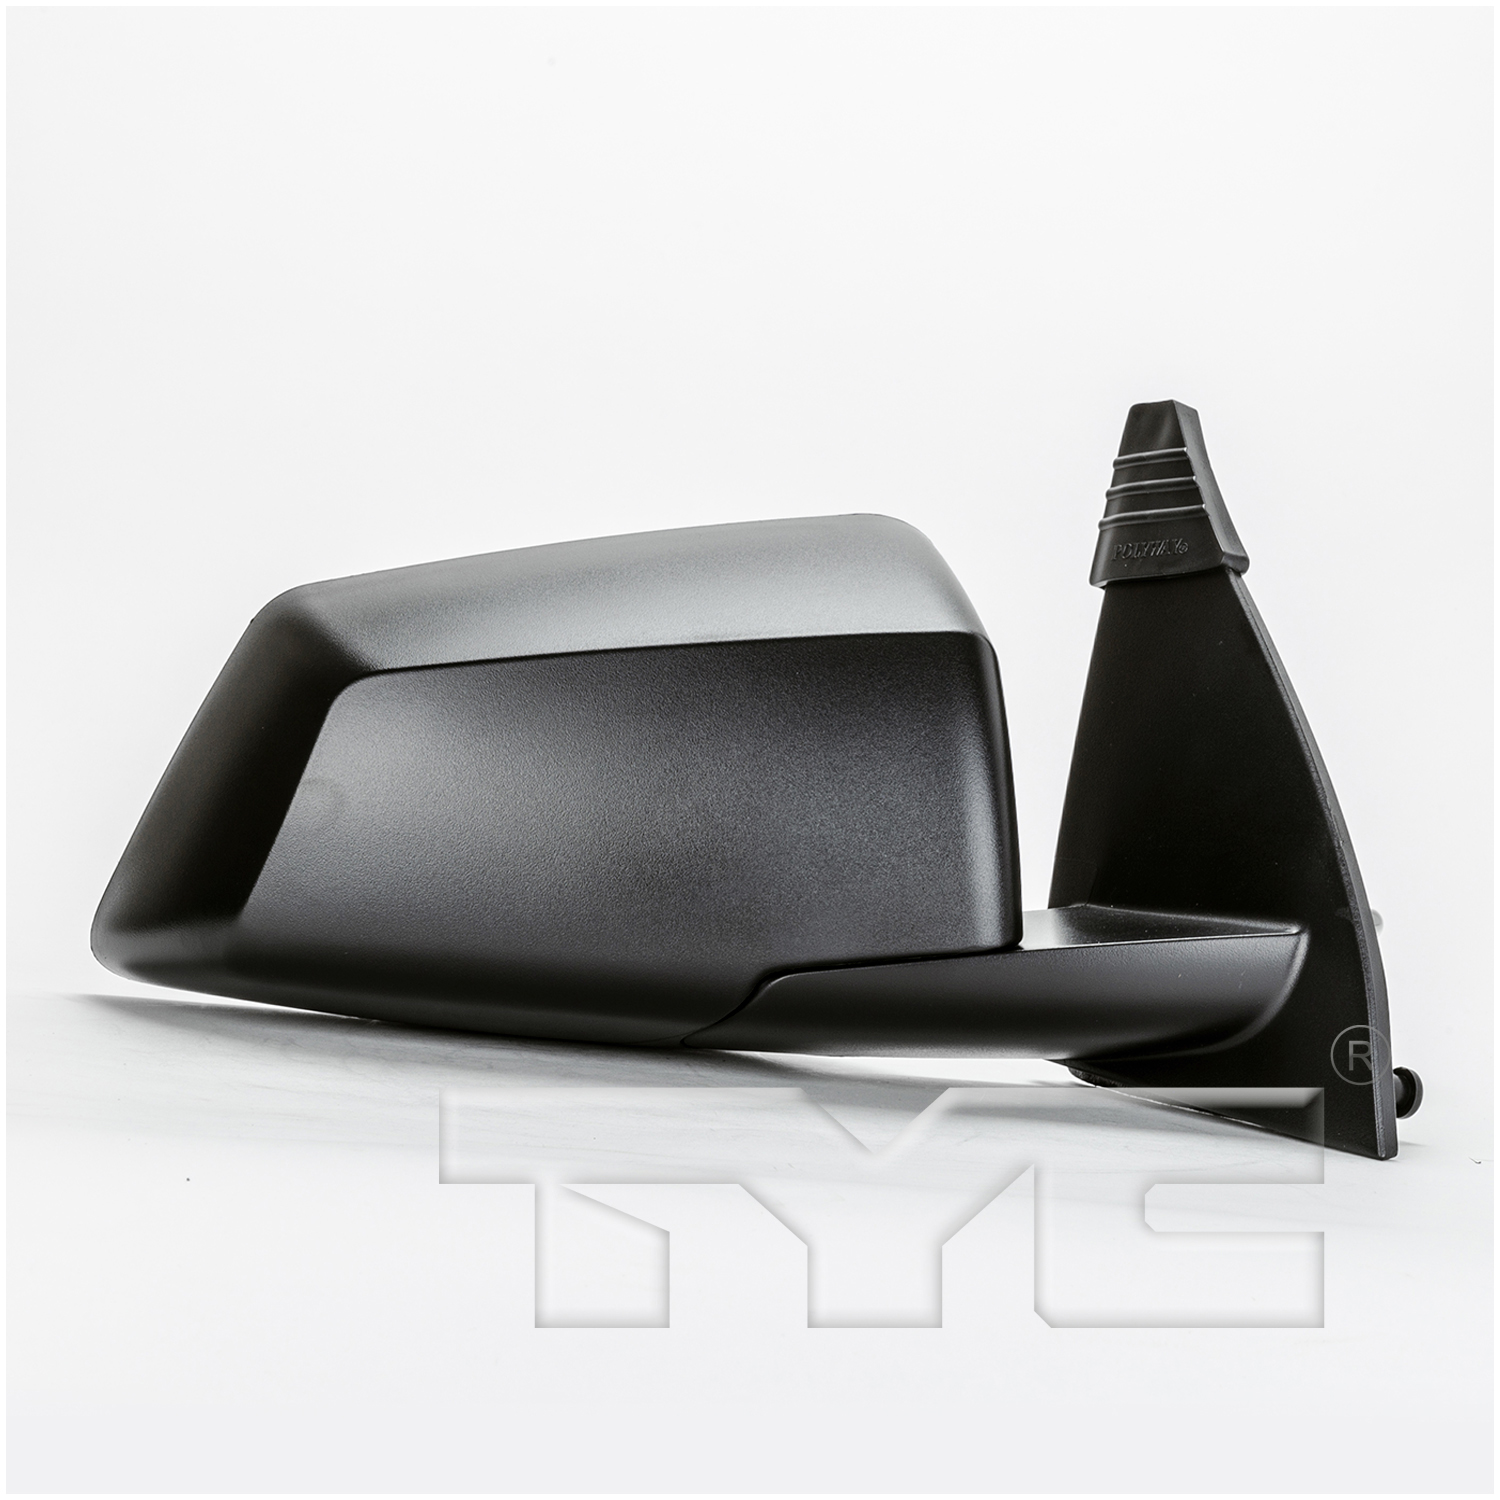 Aftermarket MIRRORS for SATURN - OUTLOOK, OUTLOOK,08-10,RT Mirror outside rear view